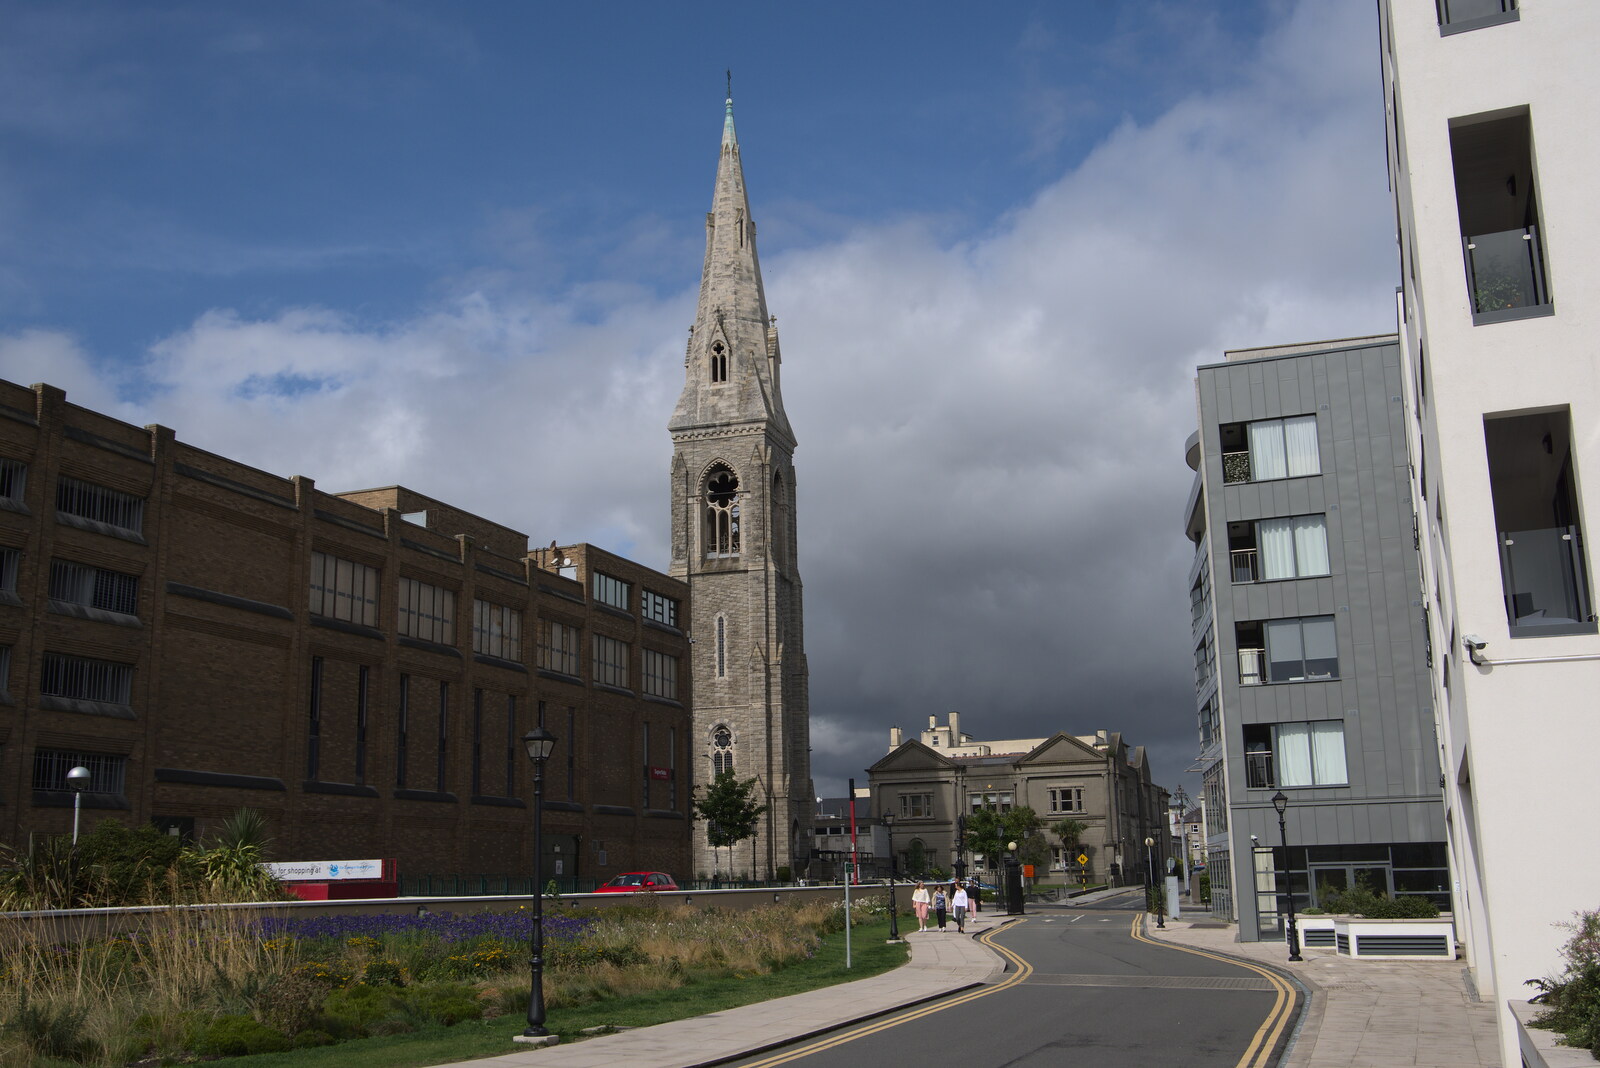 Another view of St. Patrick's spire from Marine Walk from Manorhamilton and the Street Art of Dún Laoghaire, Ireland - 15th August 2021